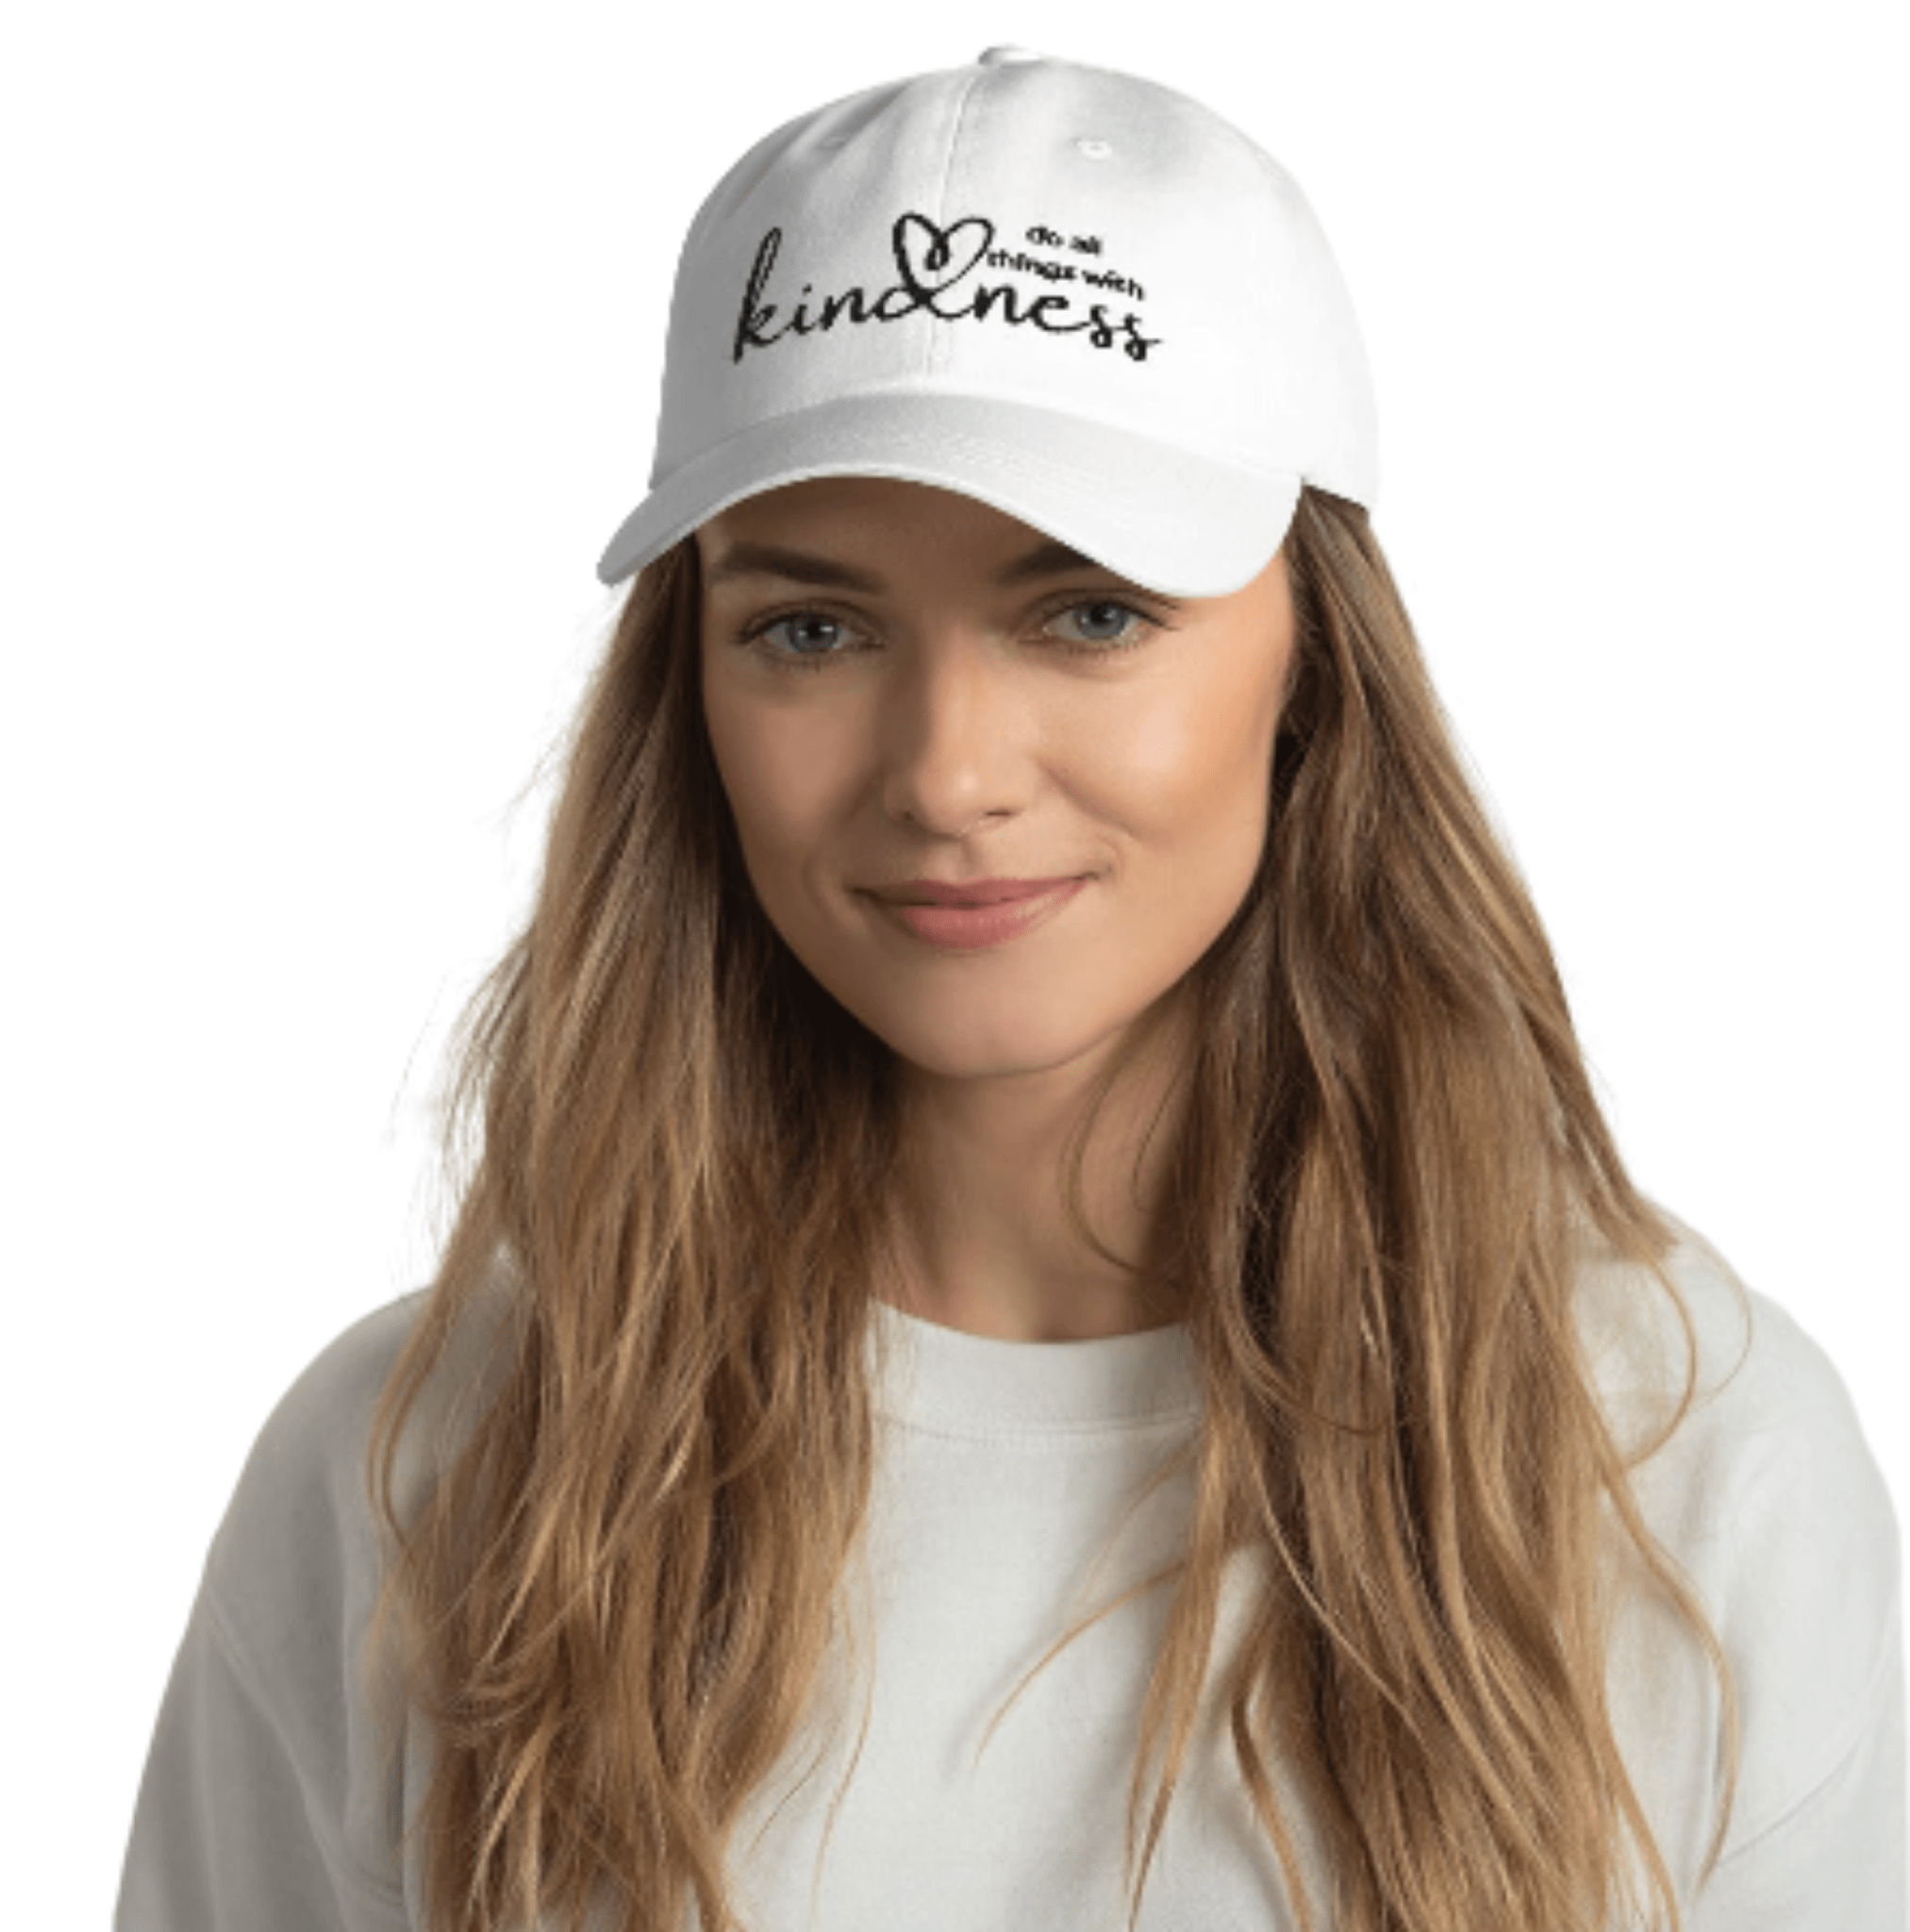 Do All Things with Kindness Embroidered Unisex Dad Hat - The Kindness Cause